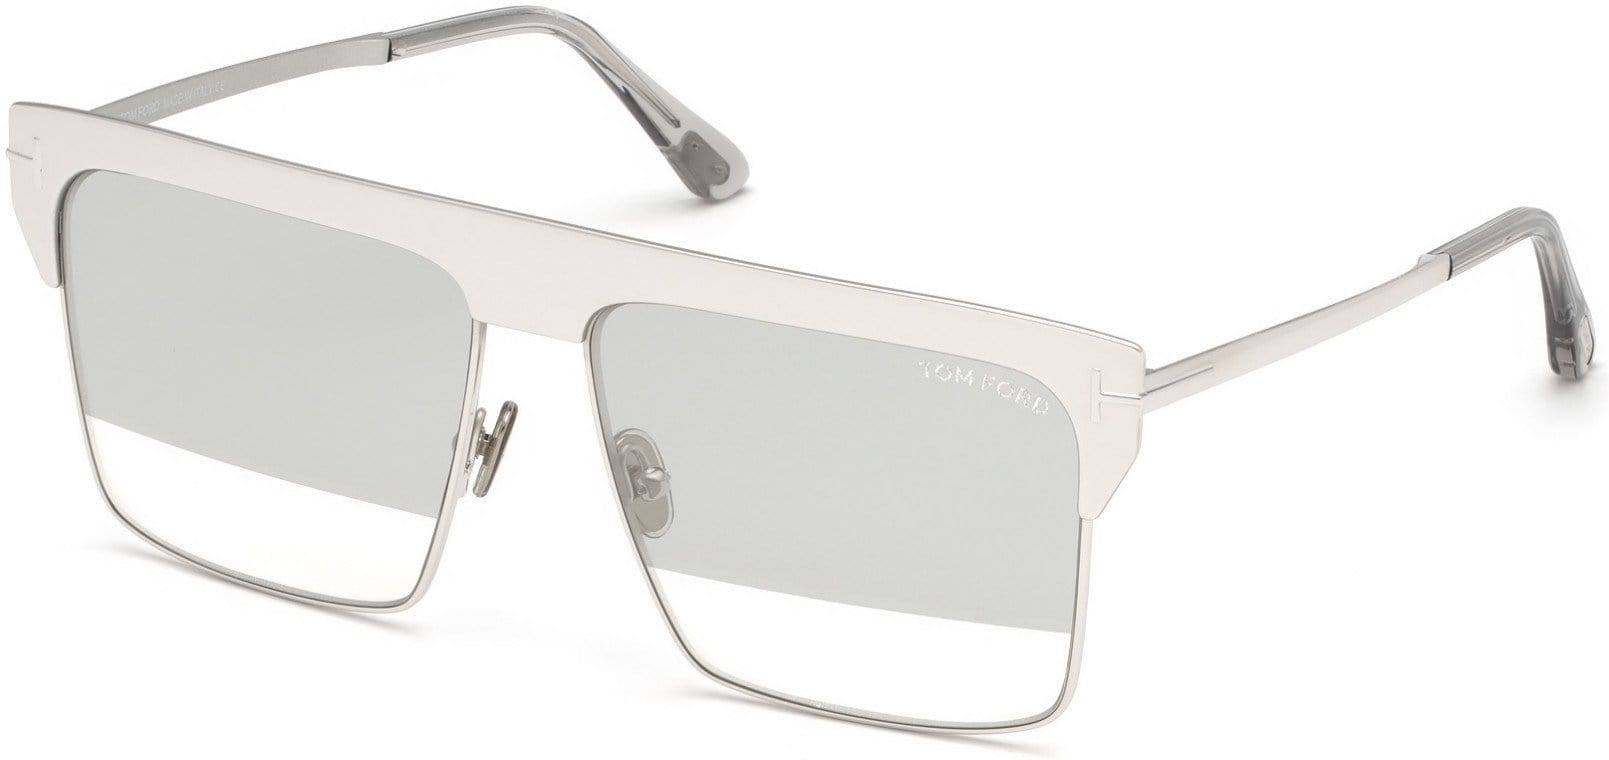 Tom Ford FT0706 West Geometric Sunglasses 18C-18C - White Gold Plated/ Clear W. White Gold Plated Flash Lenses